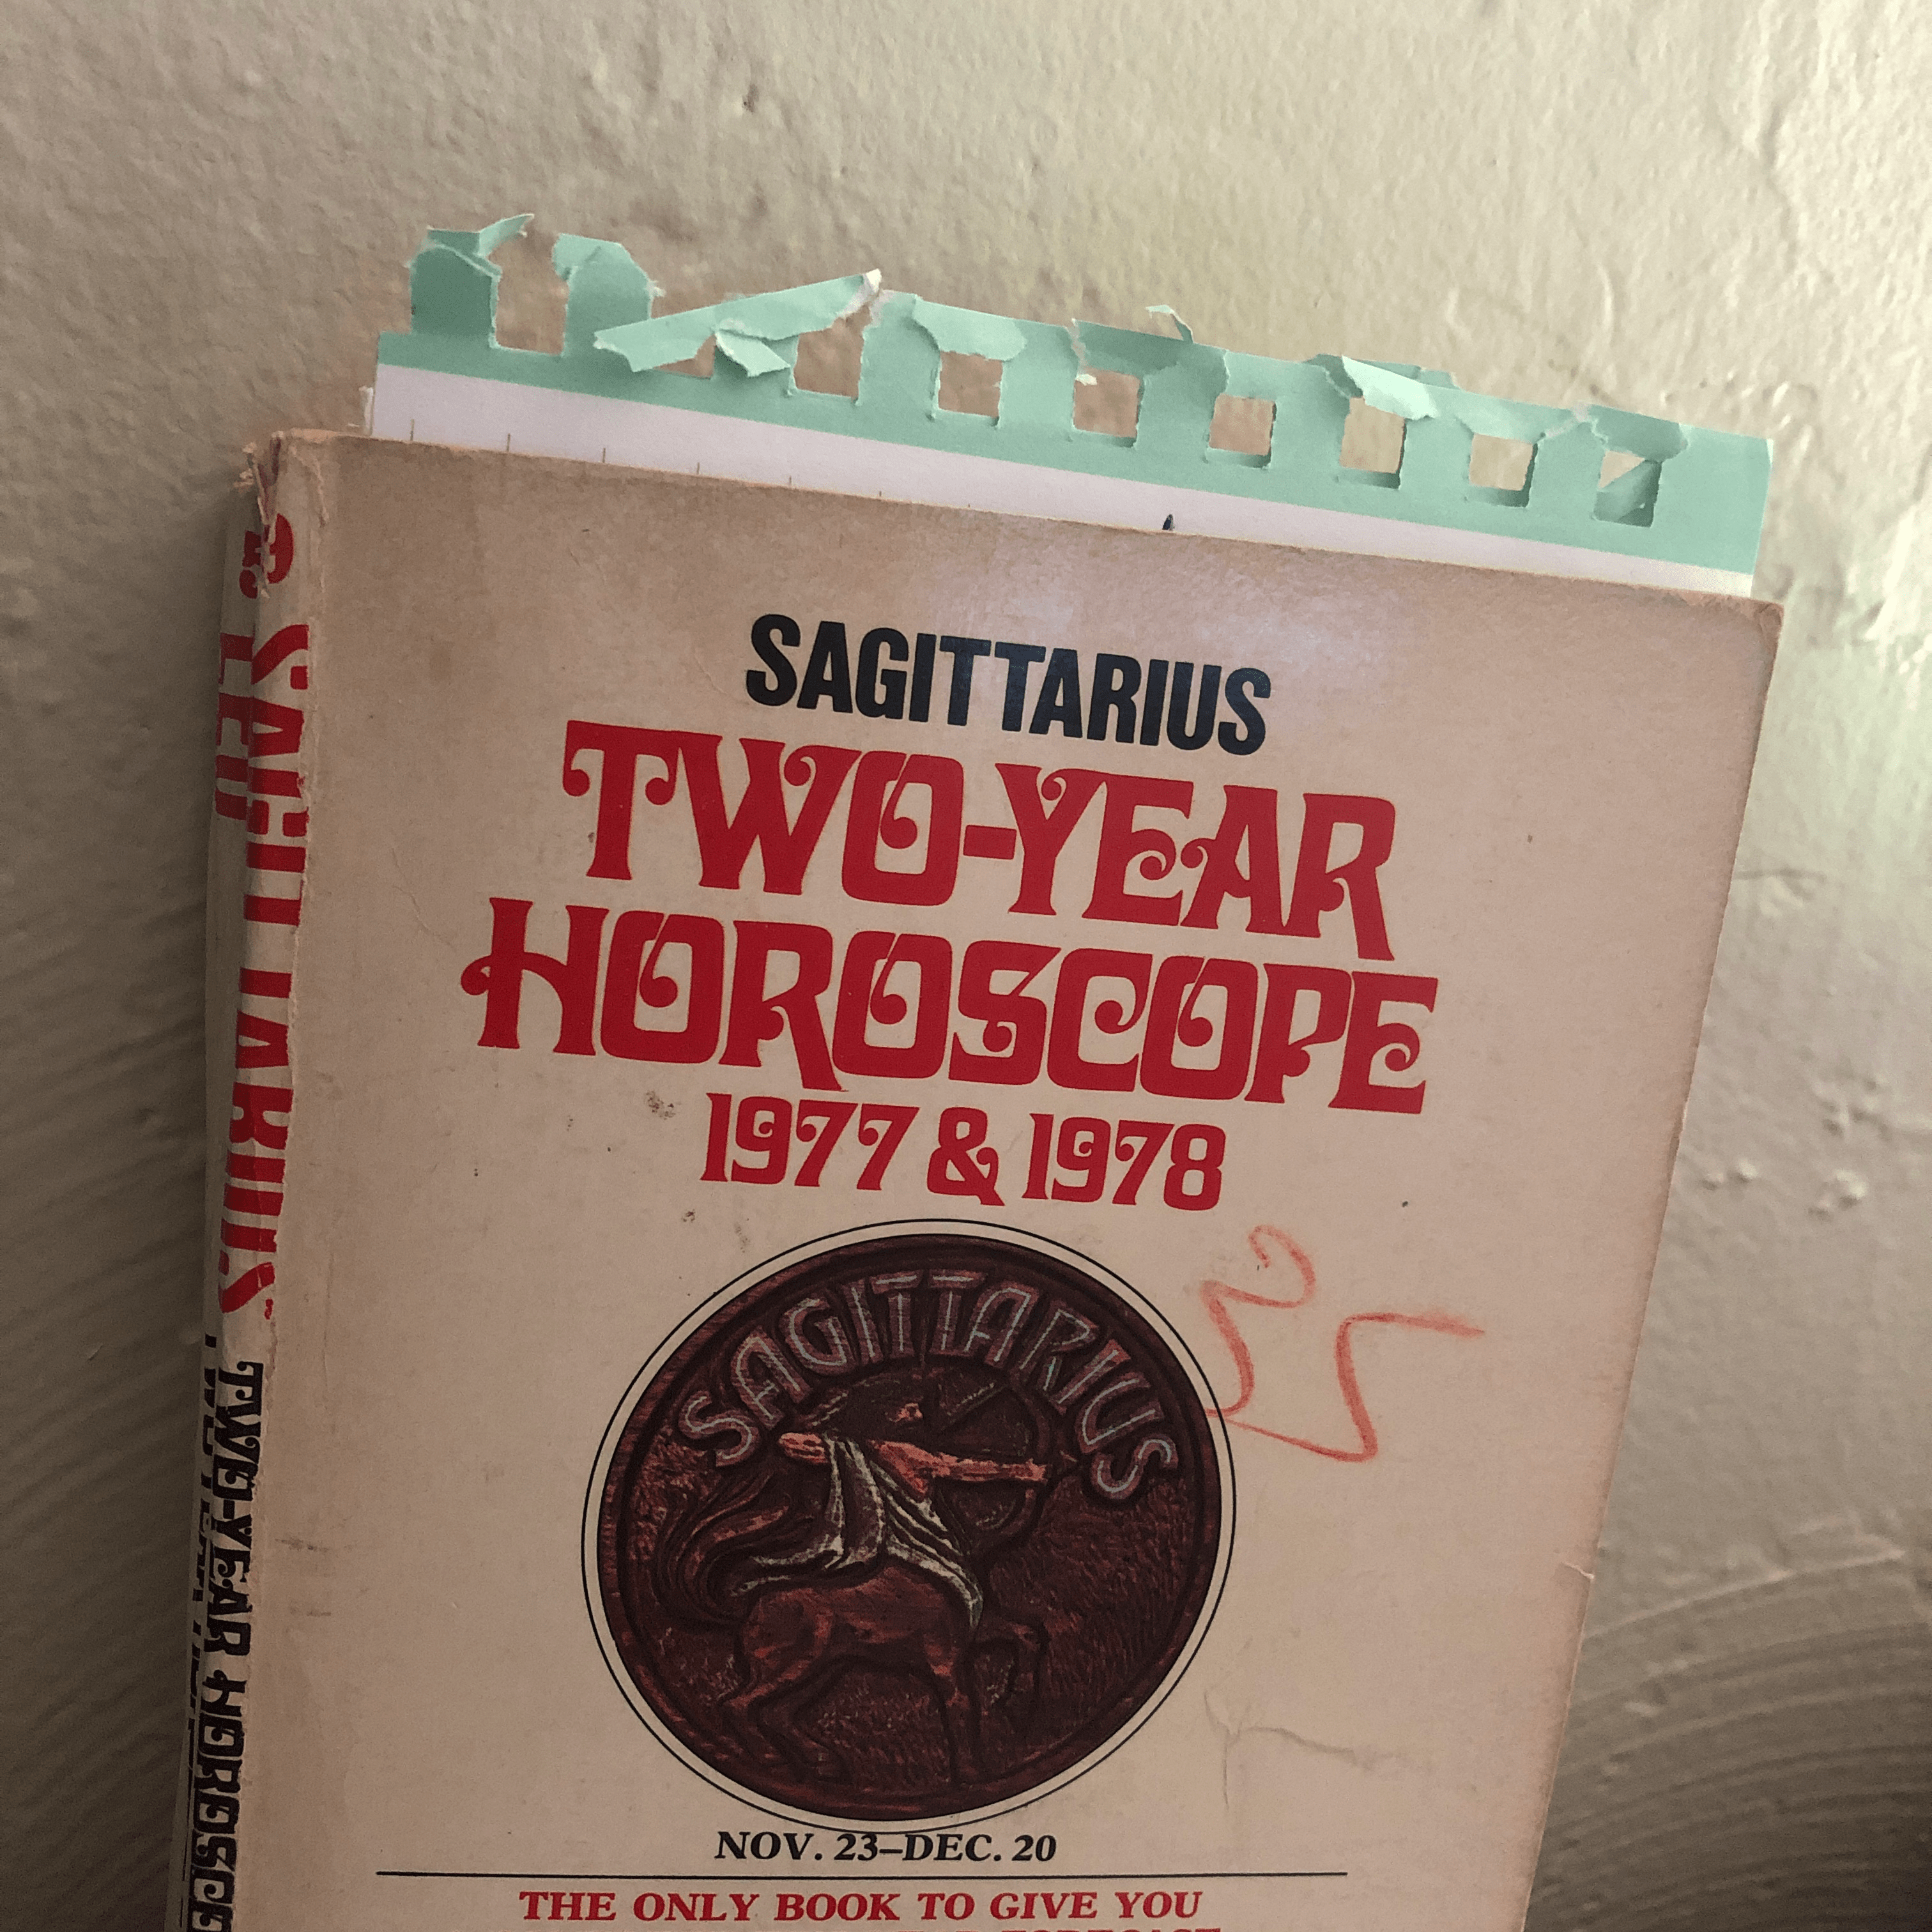 The front of an old book with the title Sagittarius Two-Year Horoscope 1977 & 1978